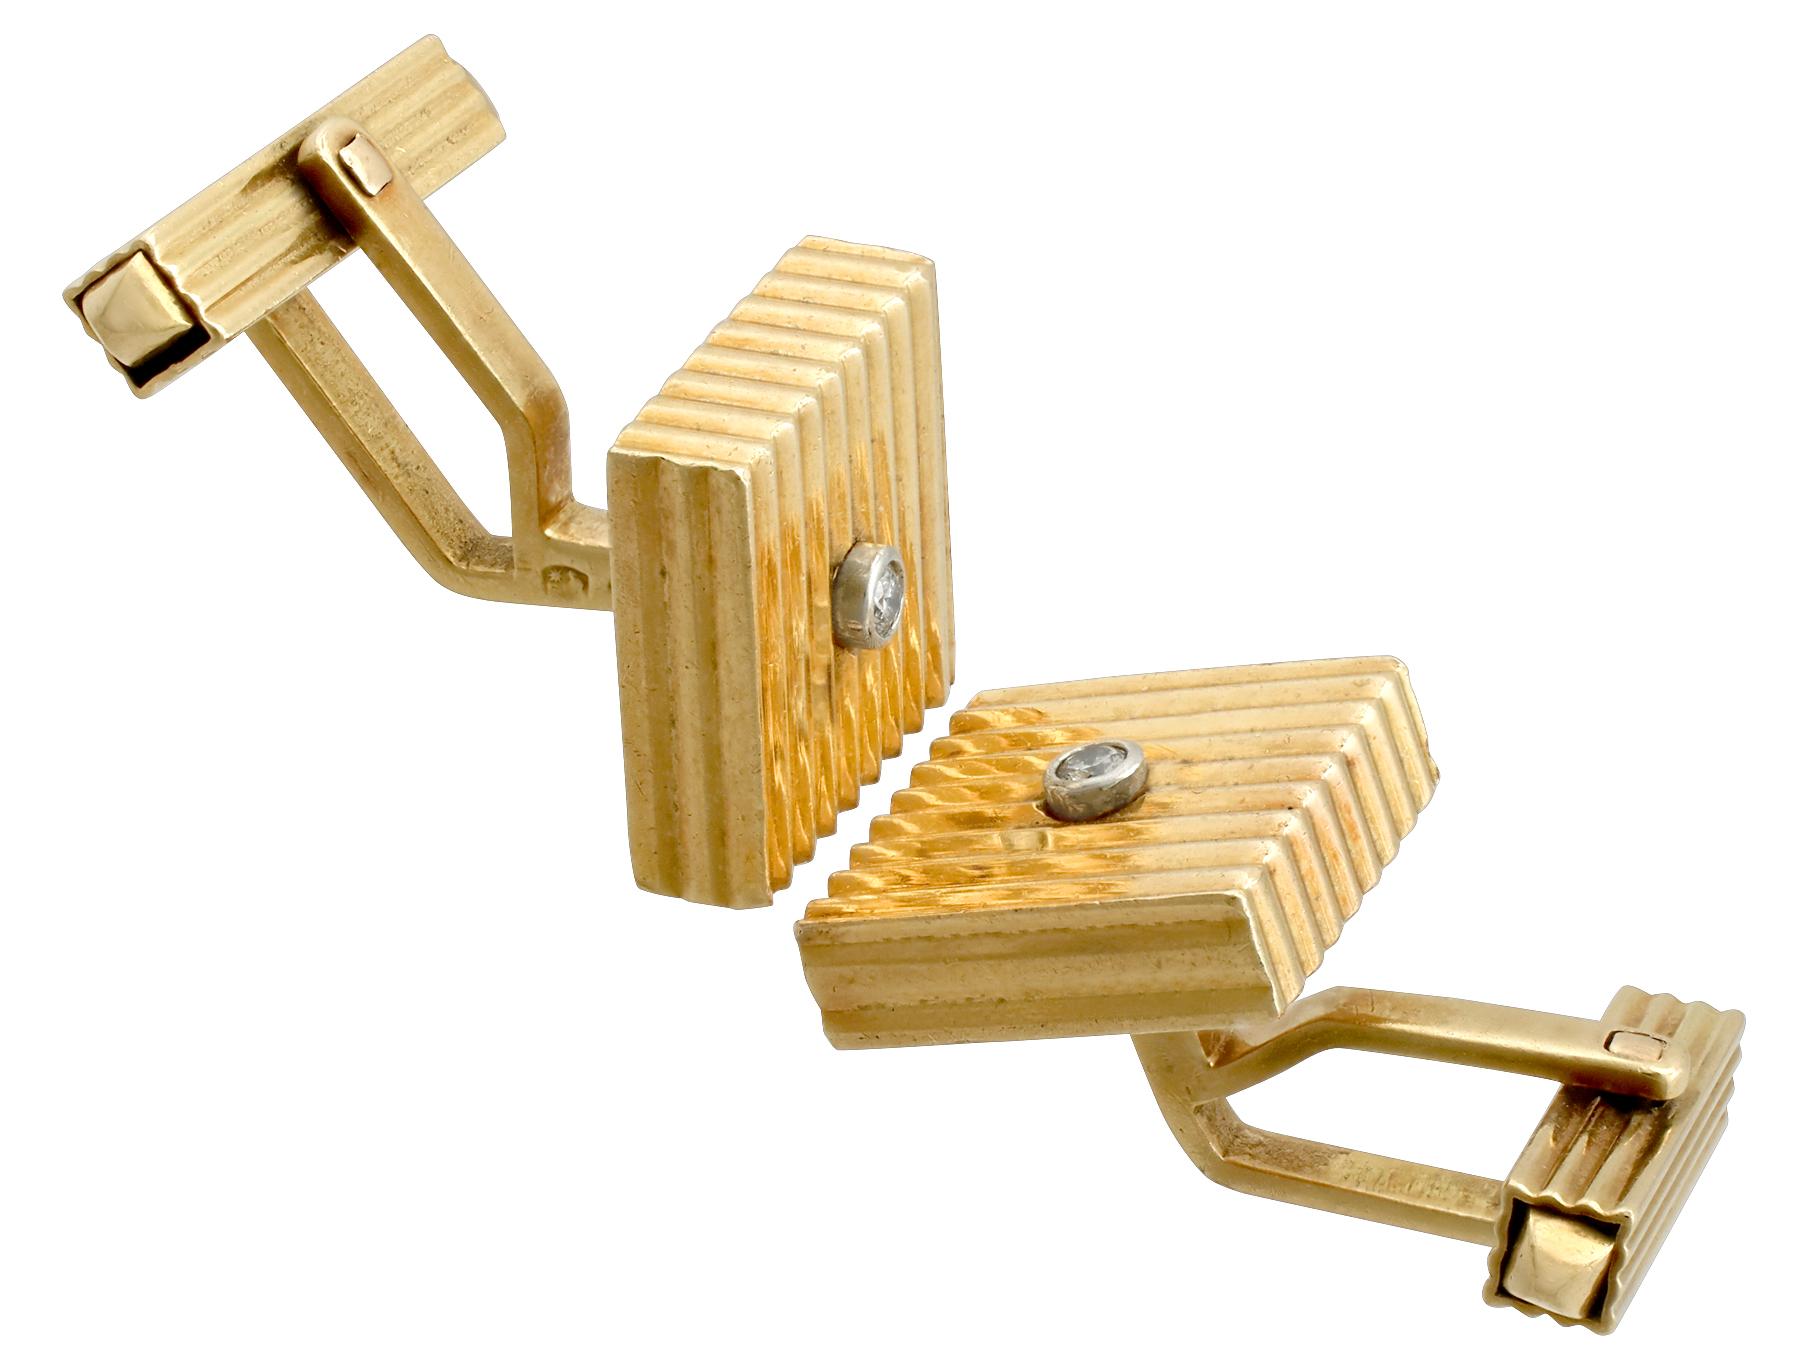 1960s German Art Deco Style Diamond Gold Cufflinks In Excellent Condition For Sale In Jesmond, Newcastle Upon Tyne